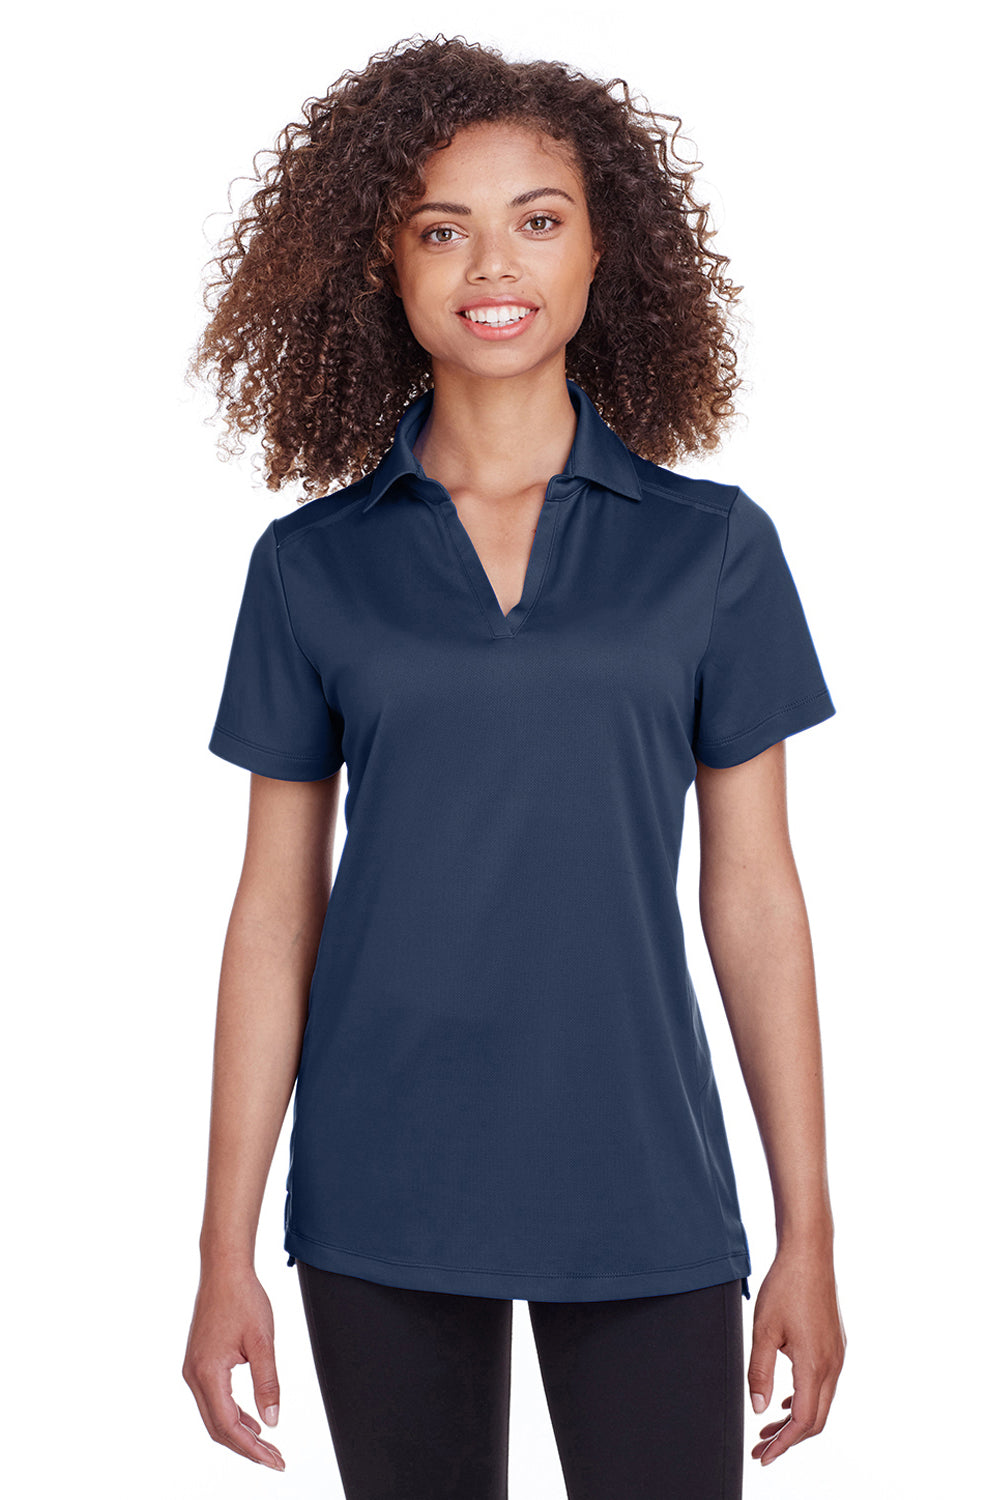 Spyder S16519 Womens Freestyle Short Sleeve Polo Shirt Navy Blue Front